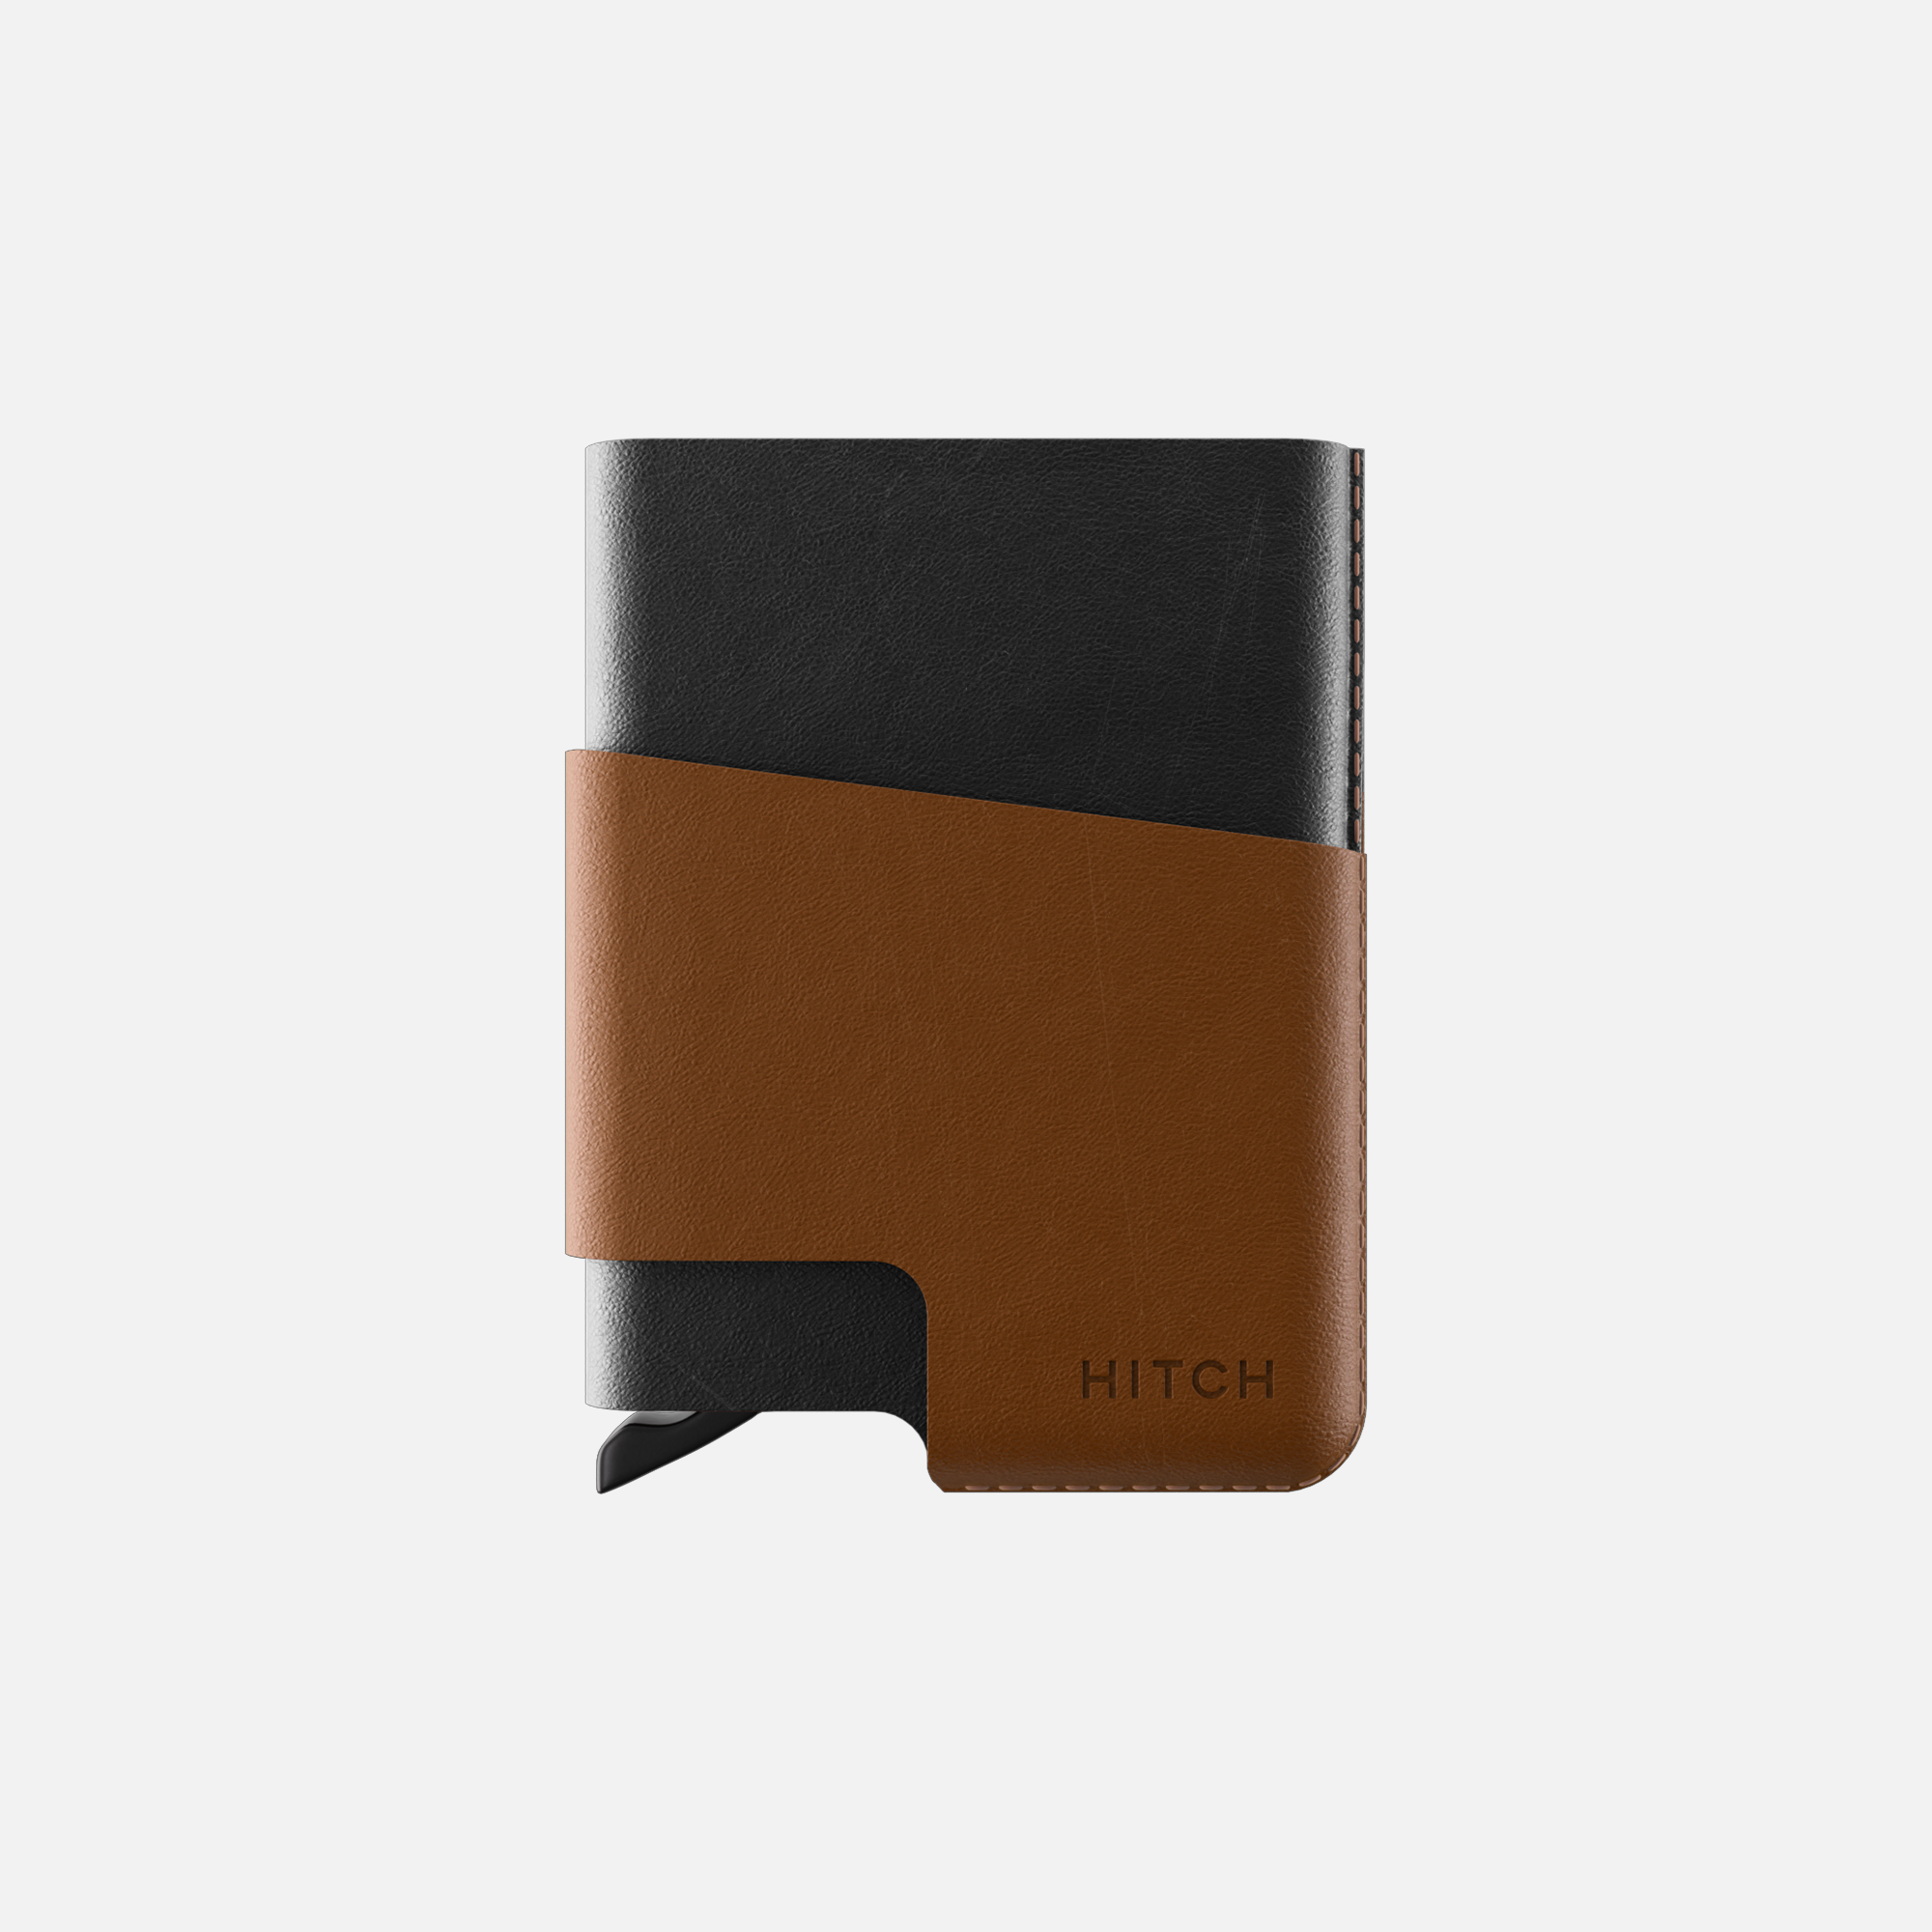 Two-tone leather wallet with a modern design on a white background.